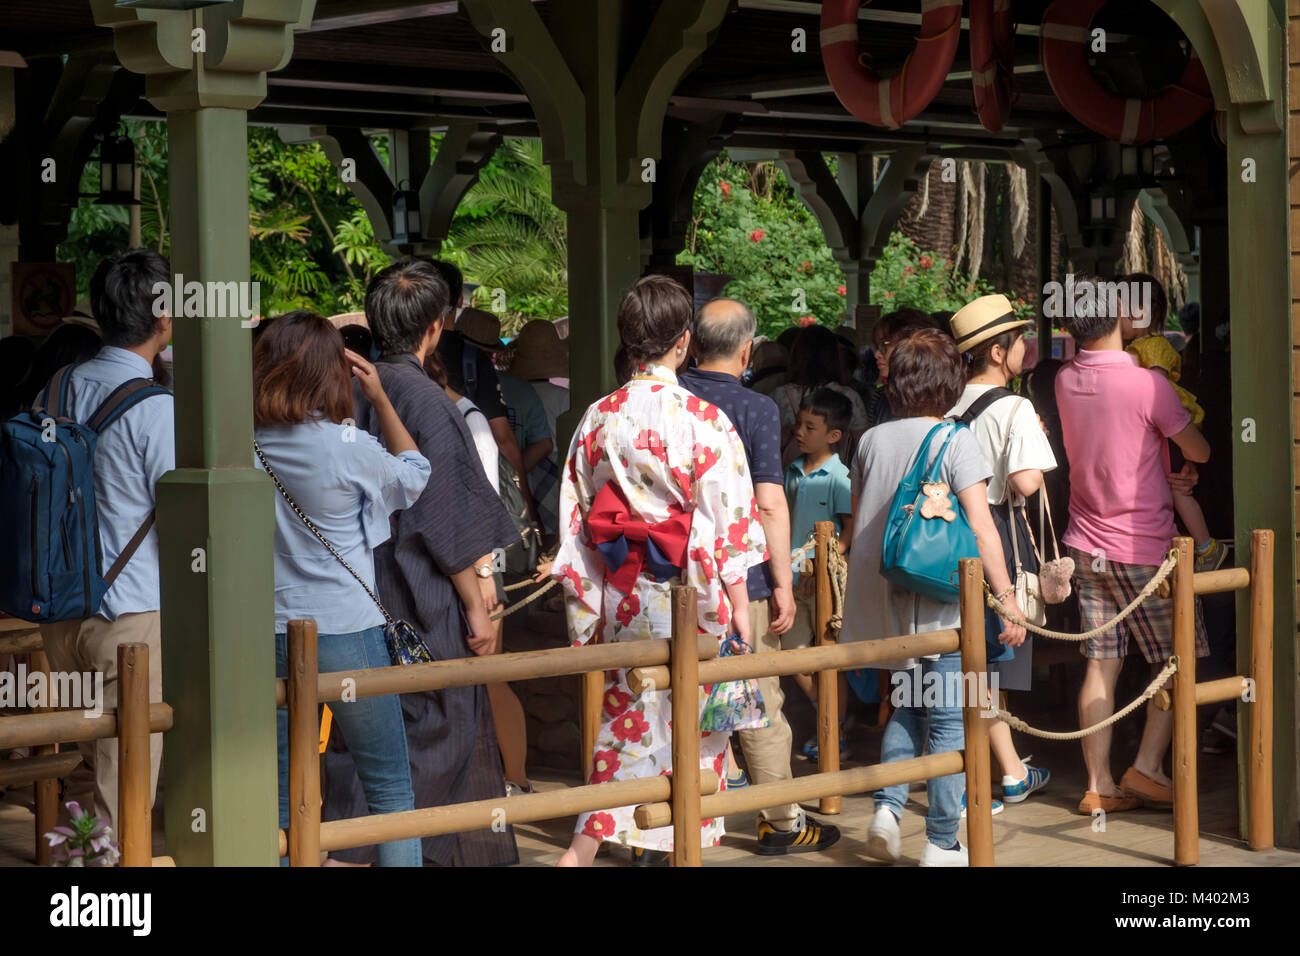 Japanese people queuing to see Disneyland Tokyo attraction. One lady in kimono. Stock Photo